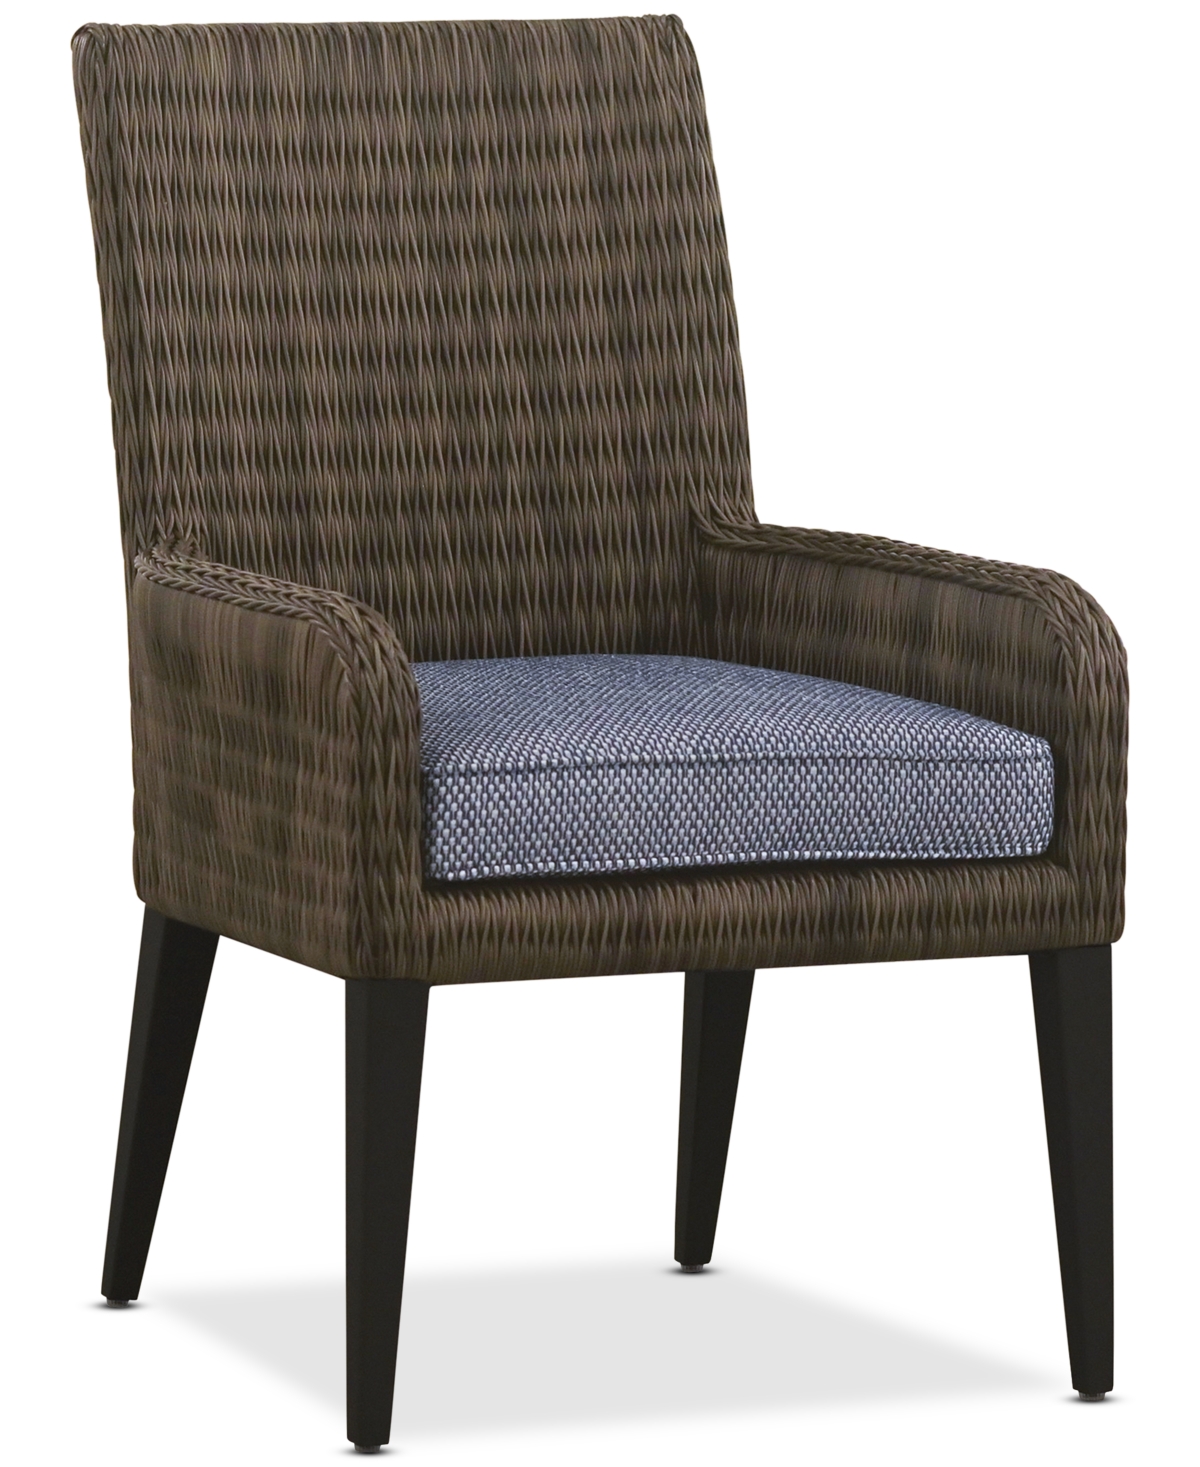 Tommy Bahama Cypress Point Outdoor Dining Chair In Cobalt Blue